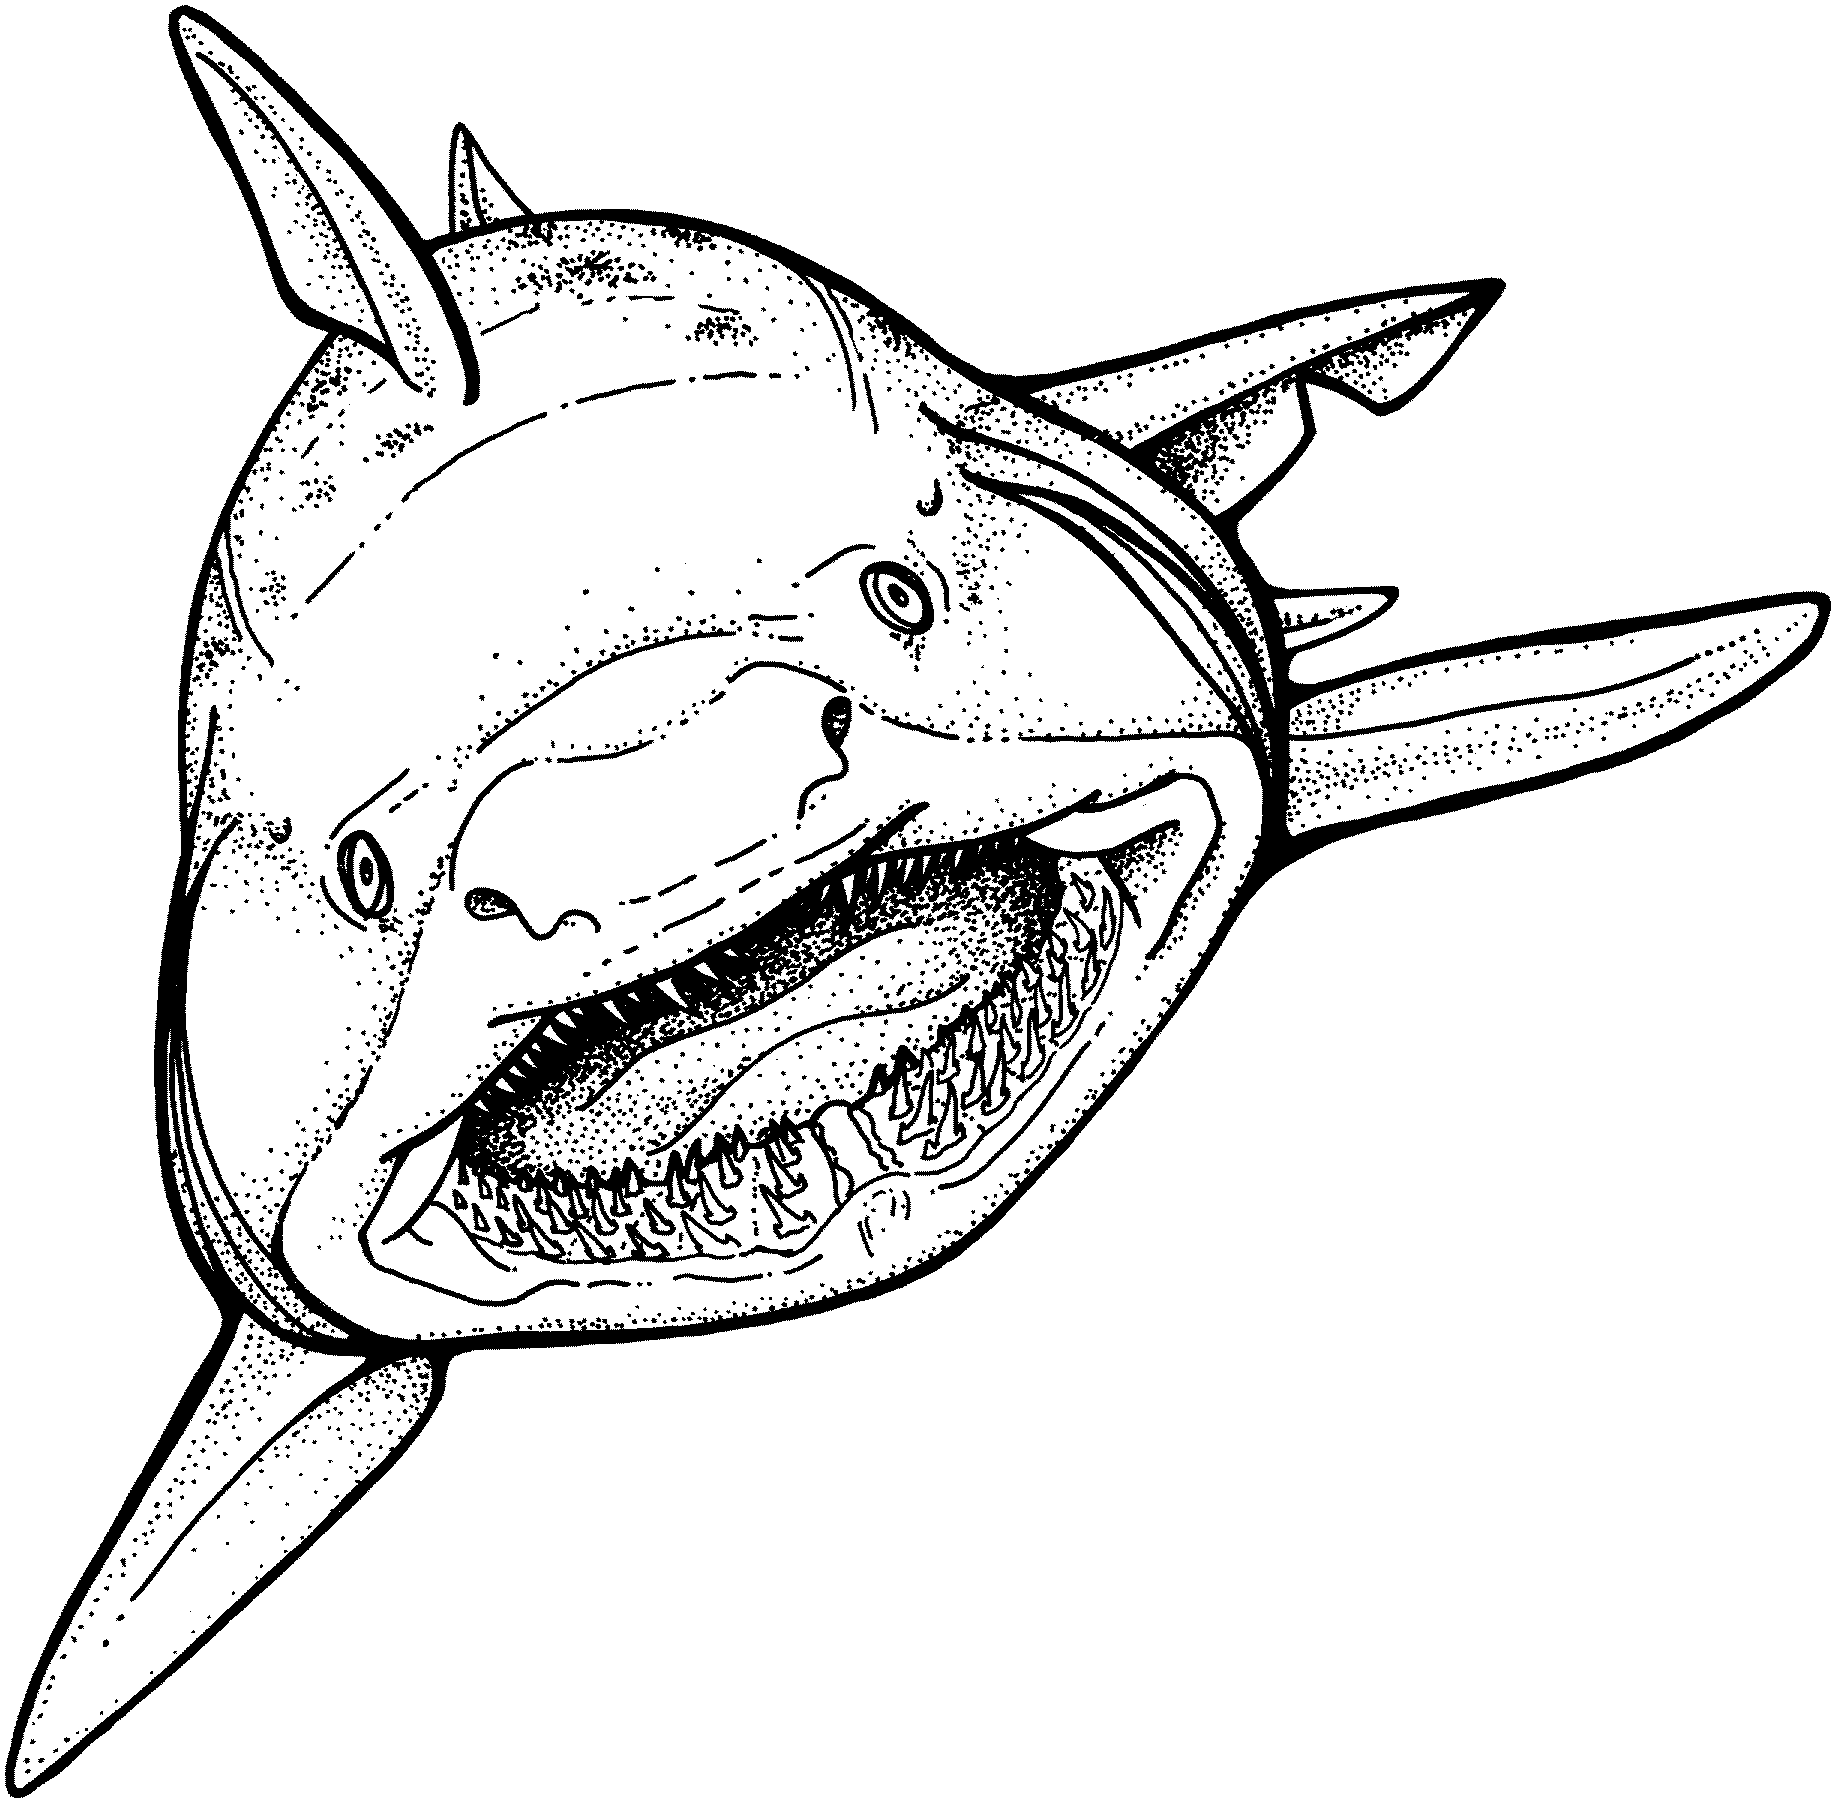 Shark (Animals) - Printable coloring pages